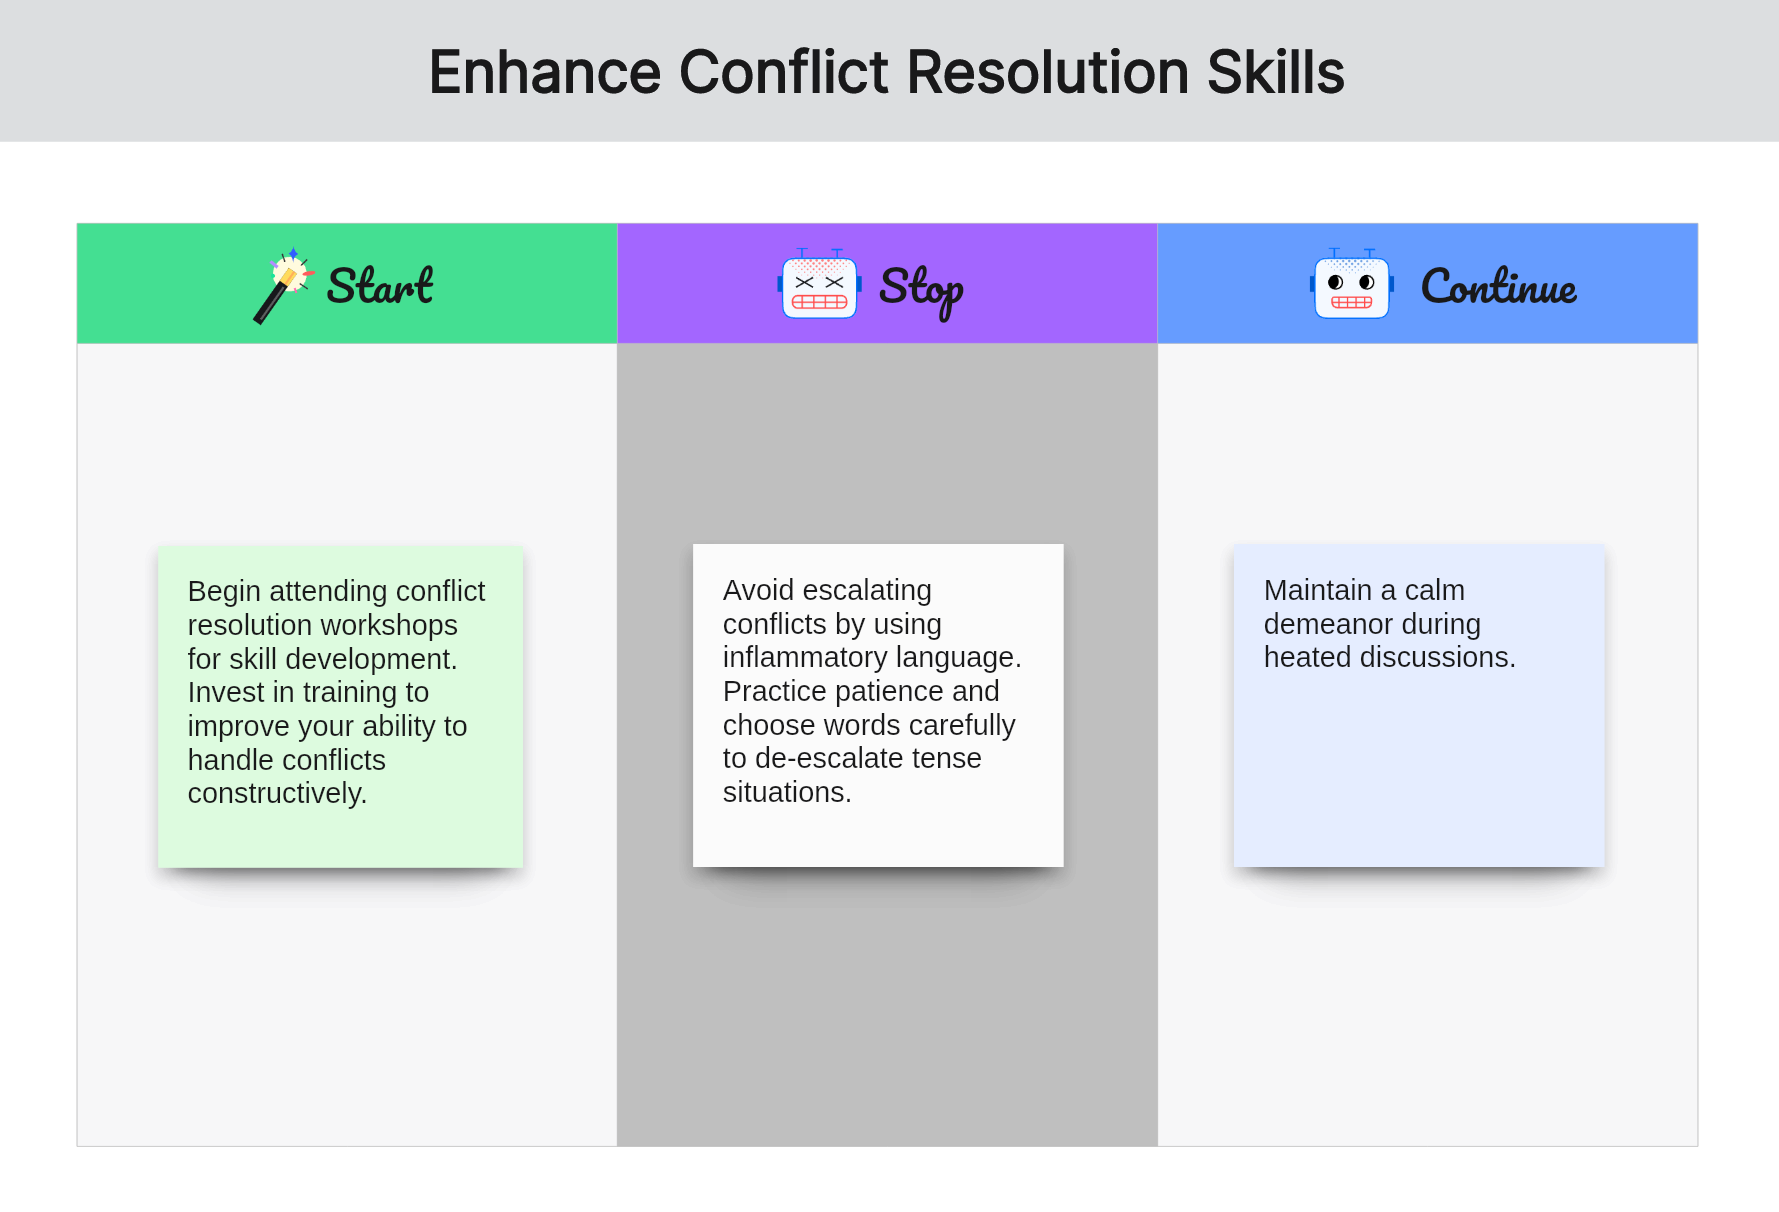 start-stop-continue-examples-for-colleagues-enhance-conflict-resolution-skills